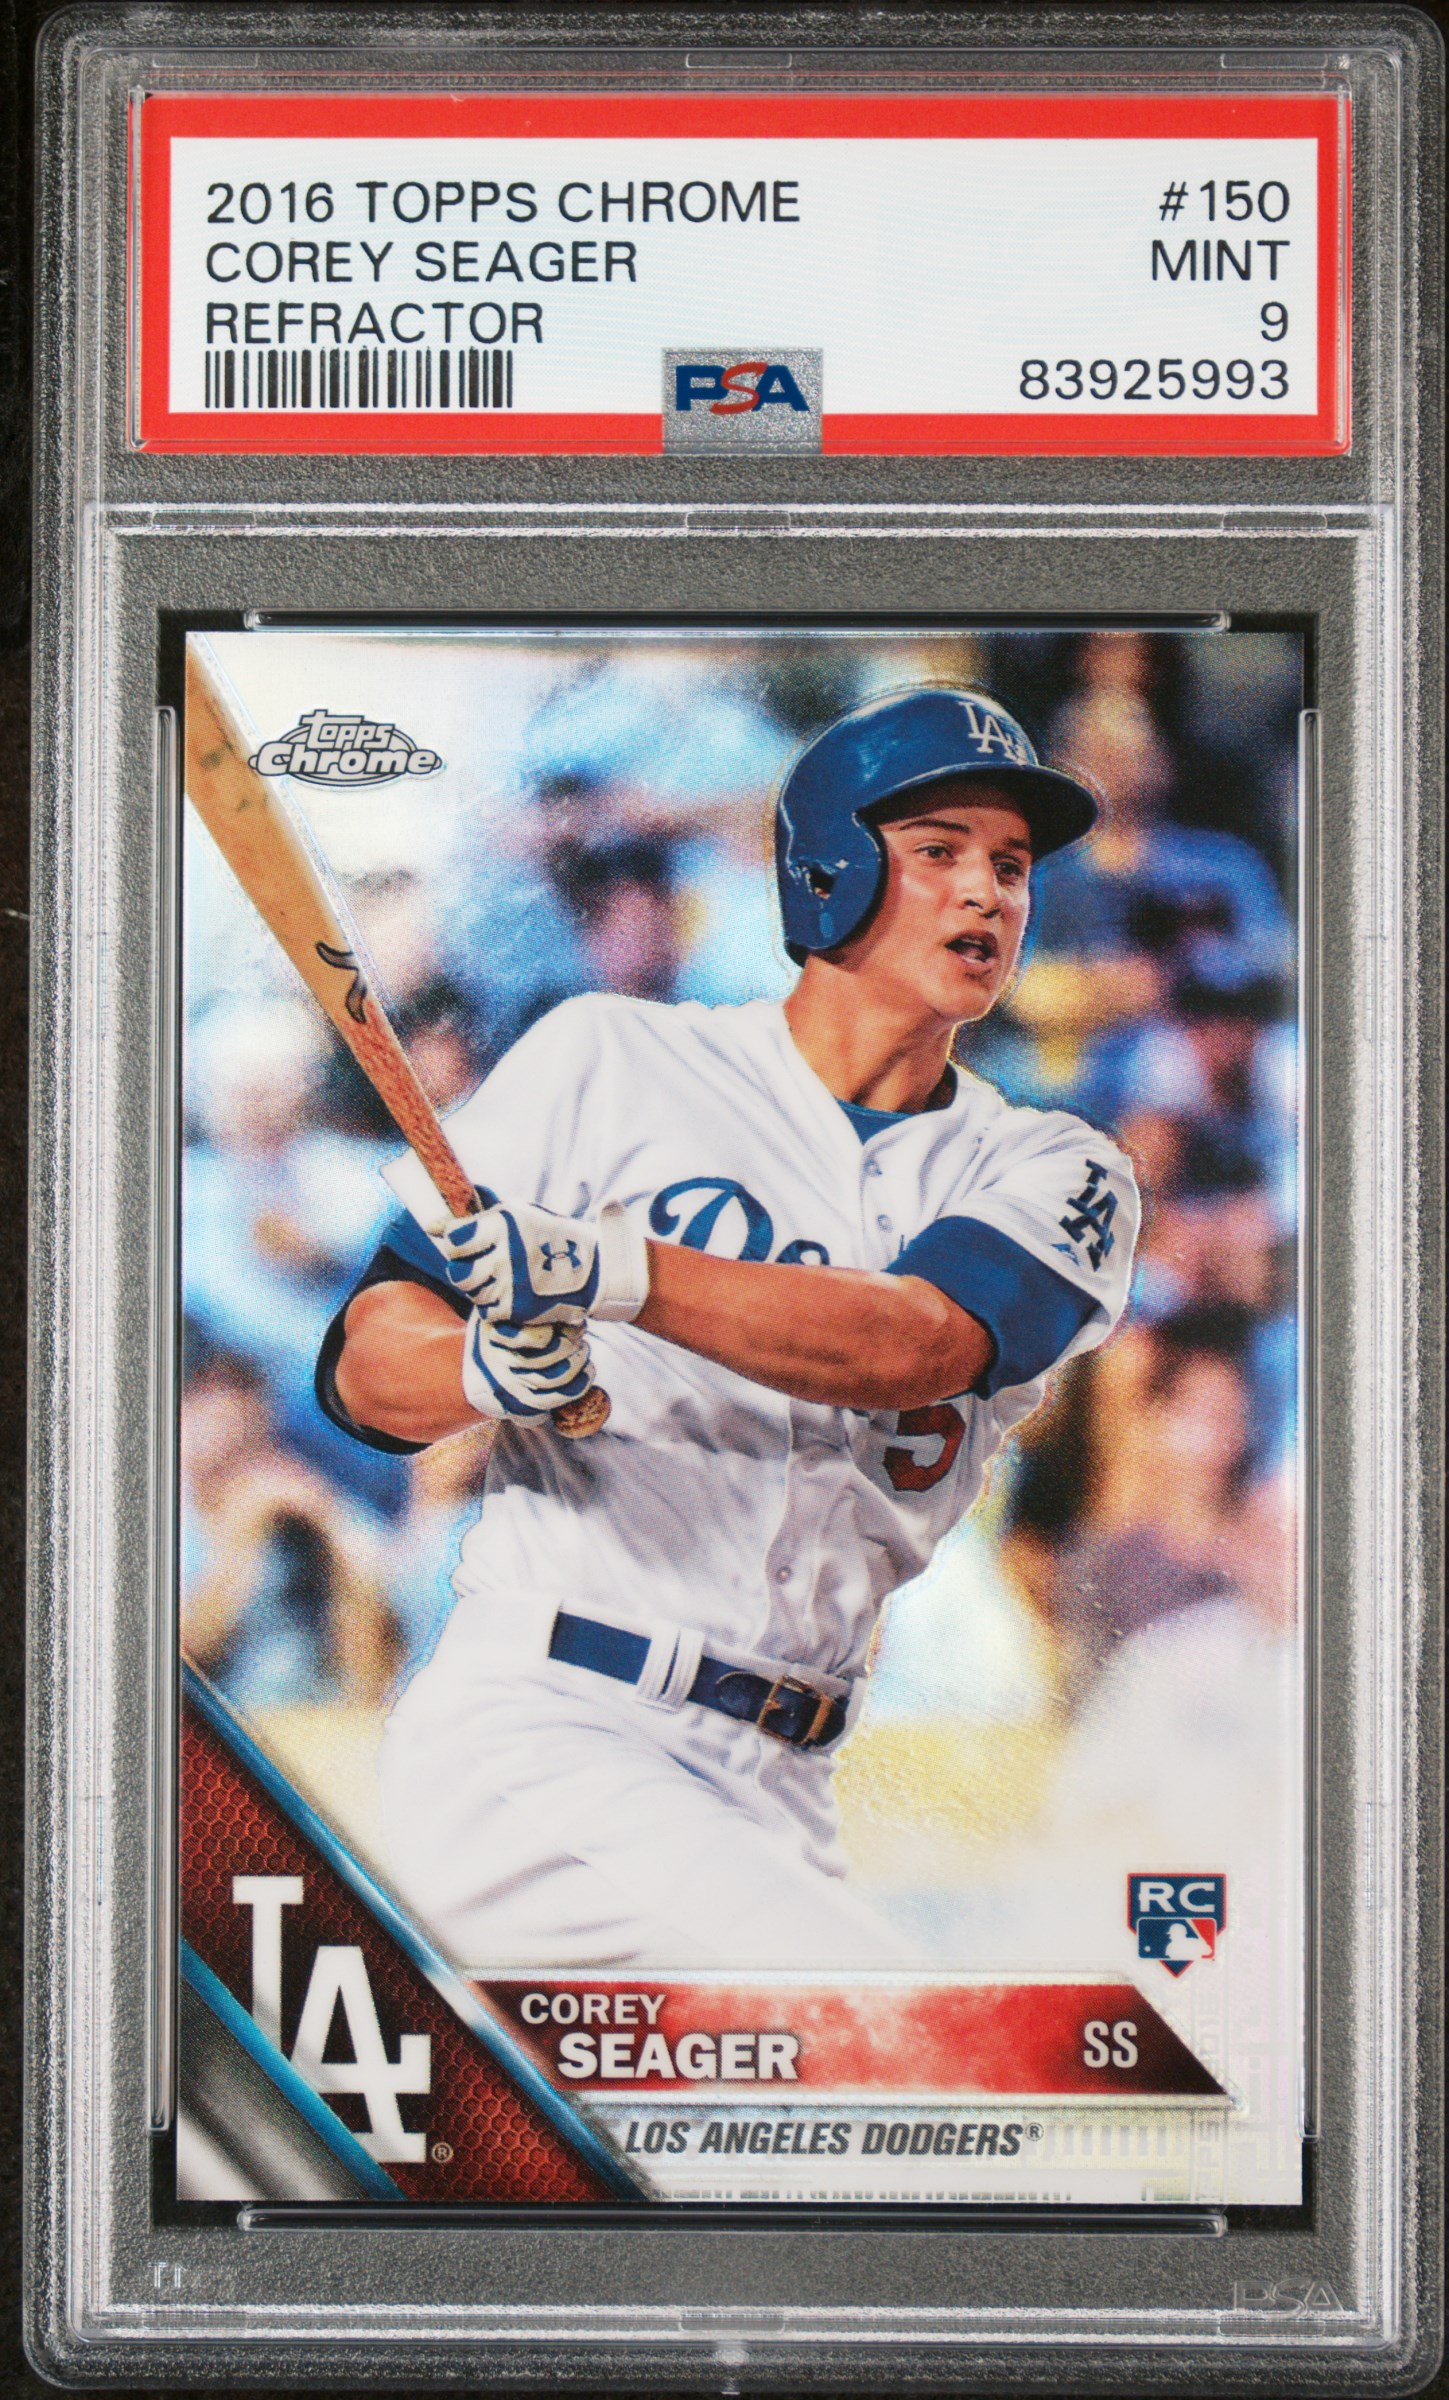 2016 Topps Chrome Refractor #150 Corey Seager Rookie Card - PSA MINT 9